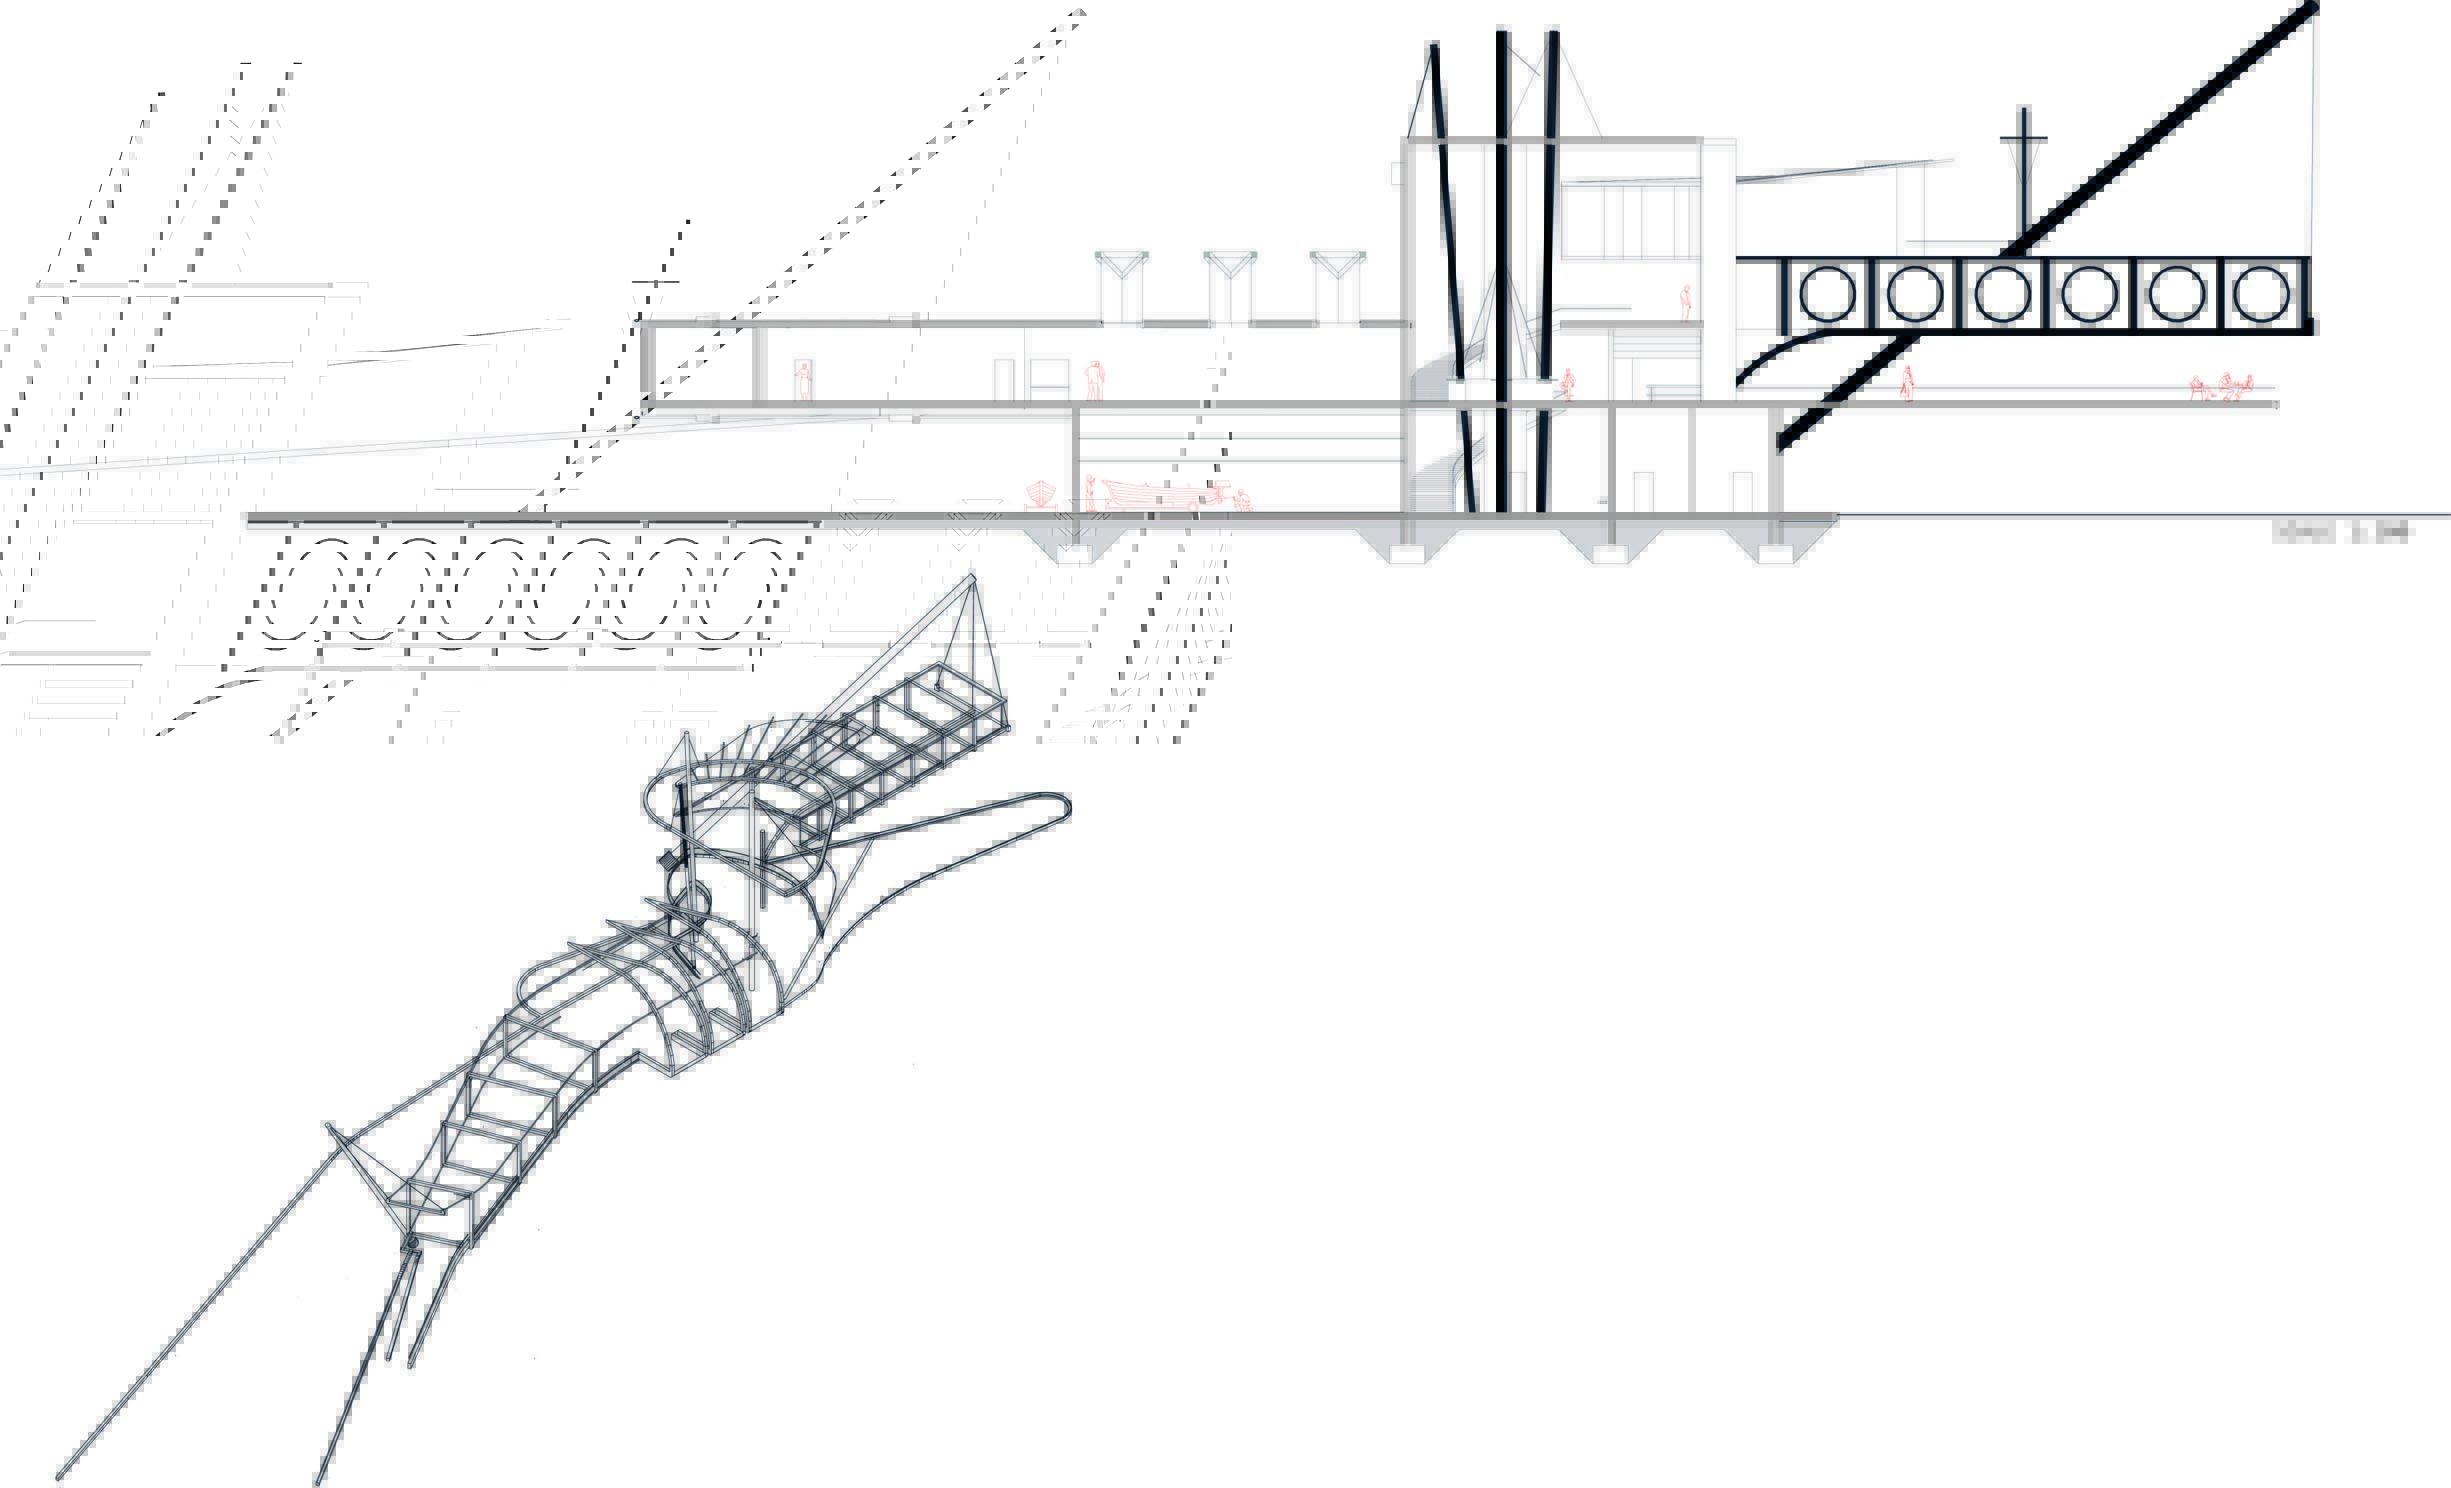 Drawing showing a section across the design along with the buildings steel skeleton structure. The main structural elements of the building.